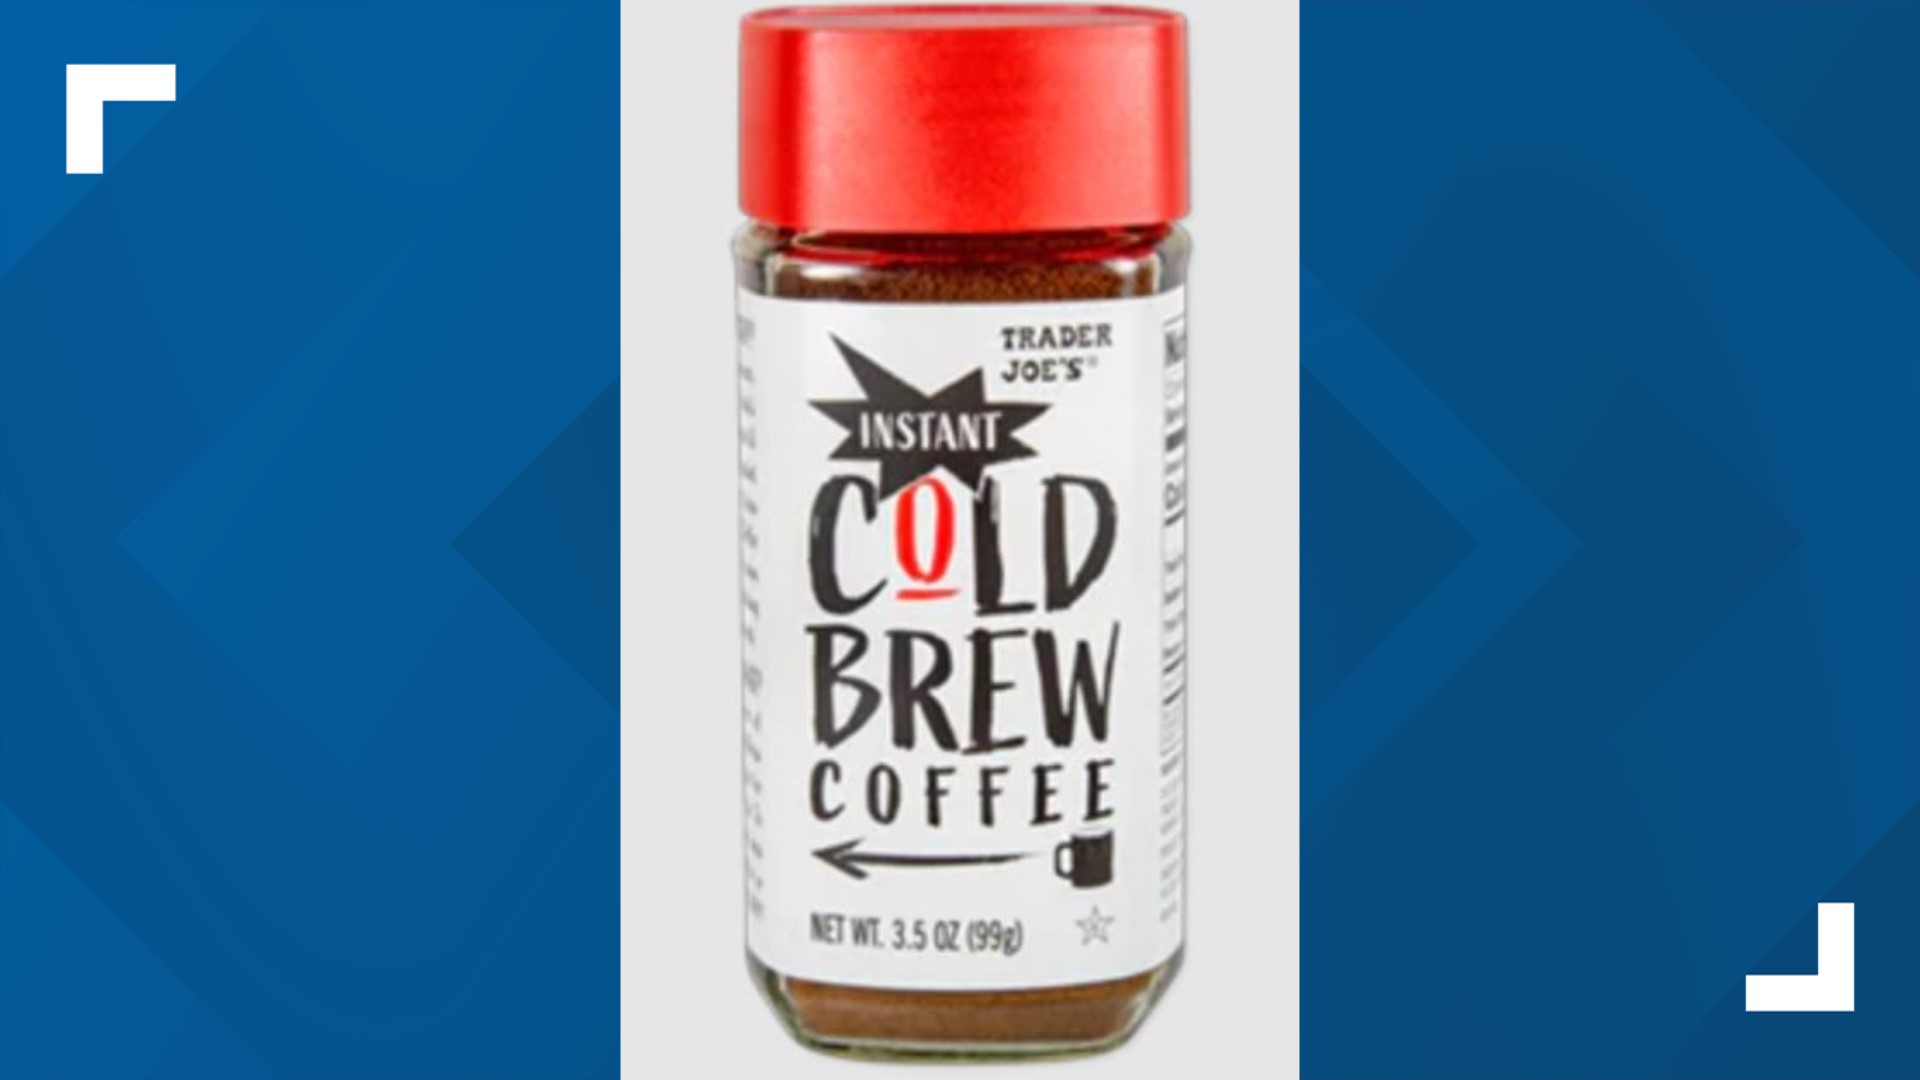 Trader Joe's is recalling its Instant Cold Brew Coffee because it may contain glass.